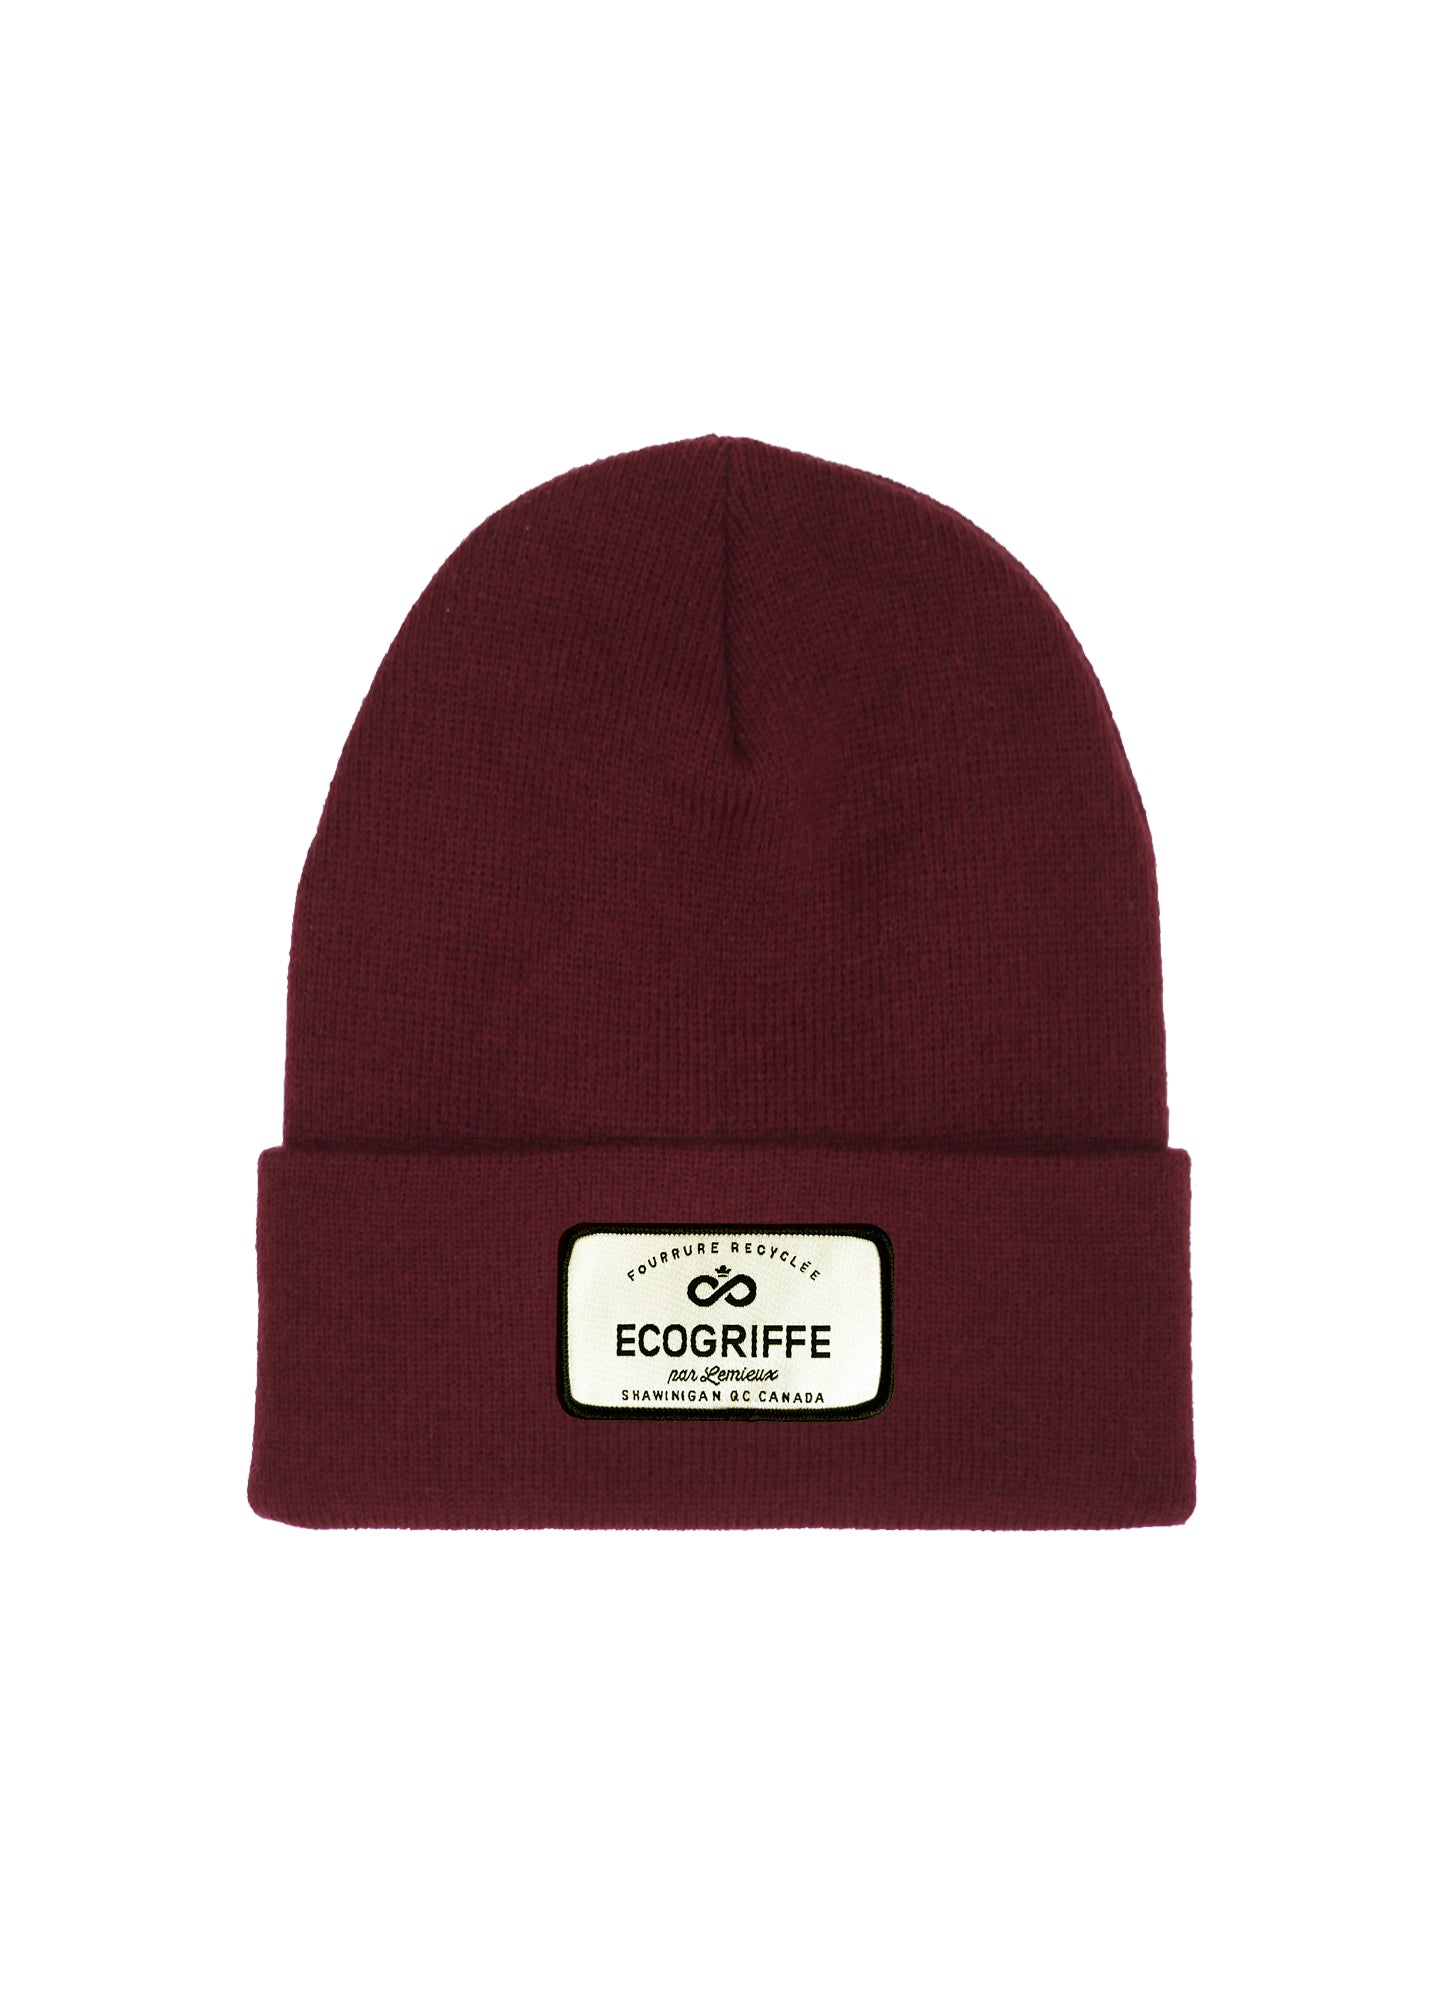 Tuque bourgogne Tradition - taille adulte